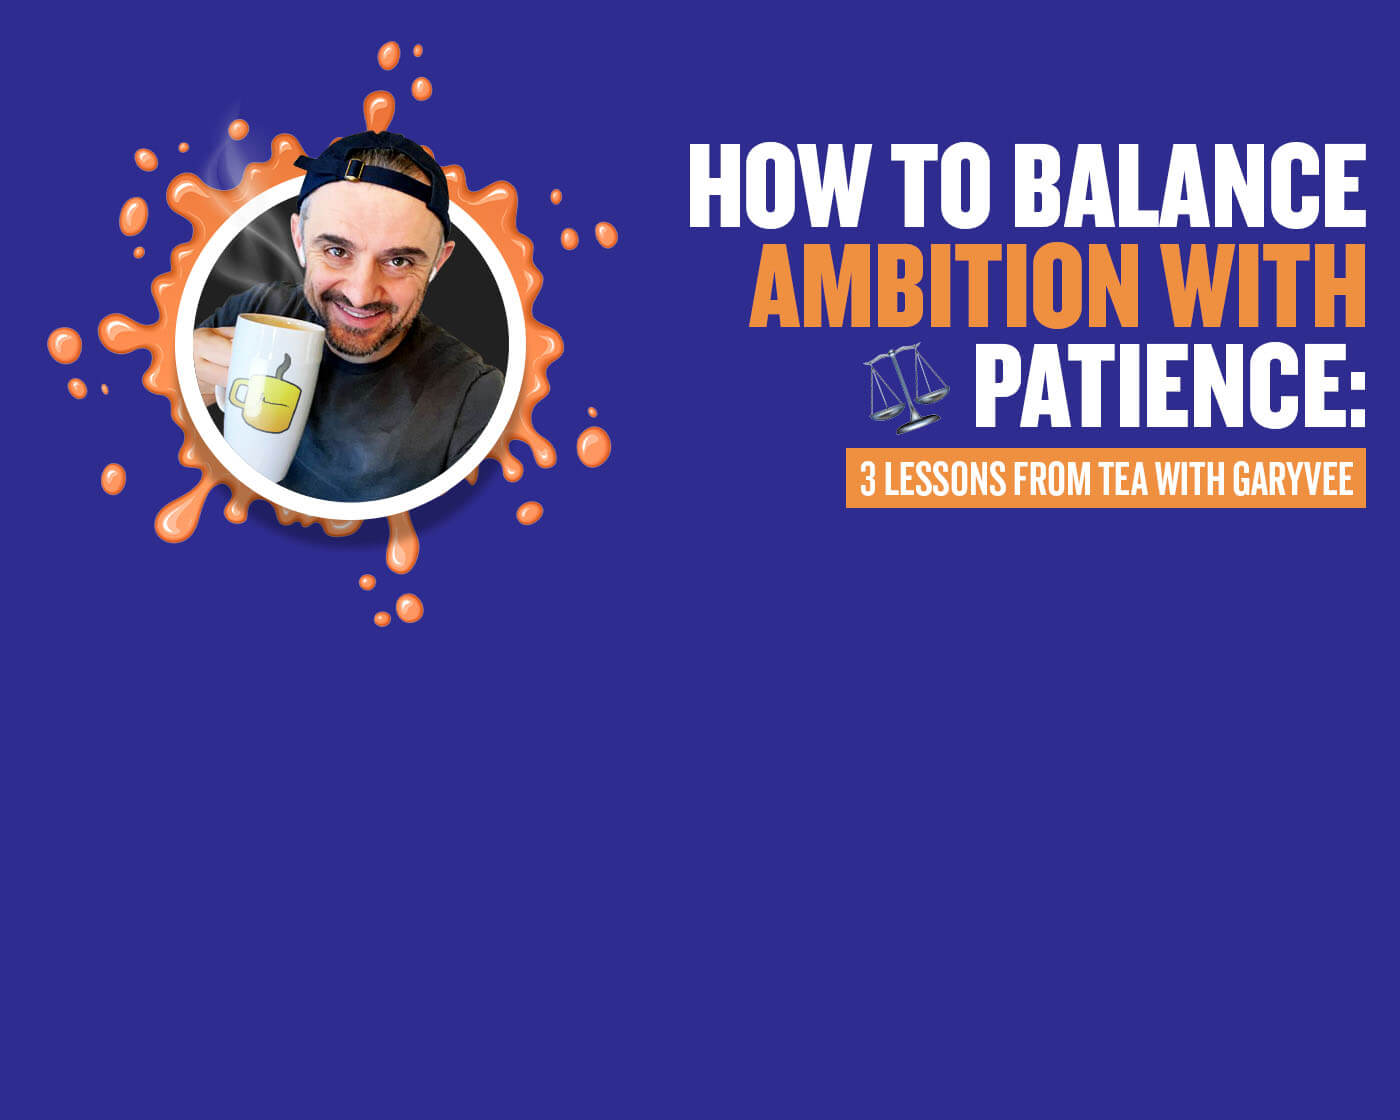 How To Balance Patience With Ambition: 3 Lessons From Tea With GaryVee